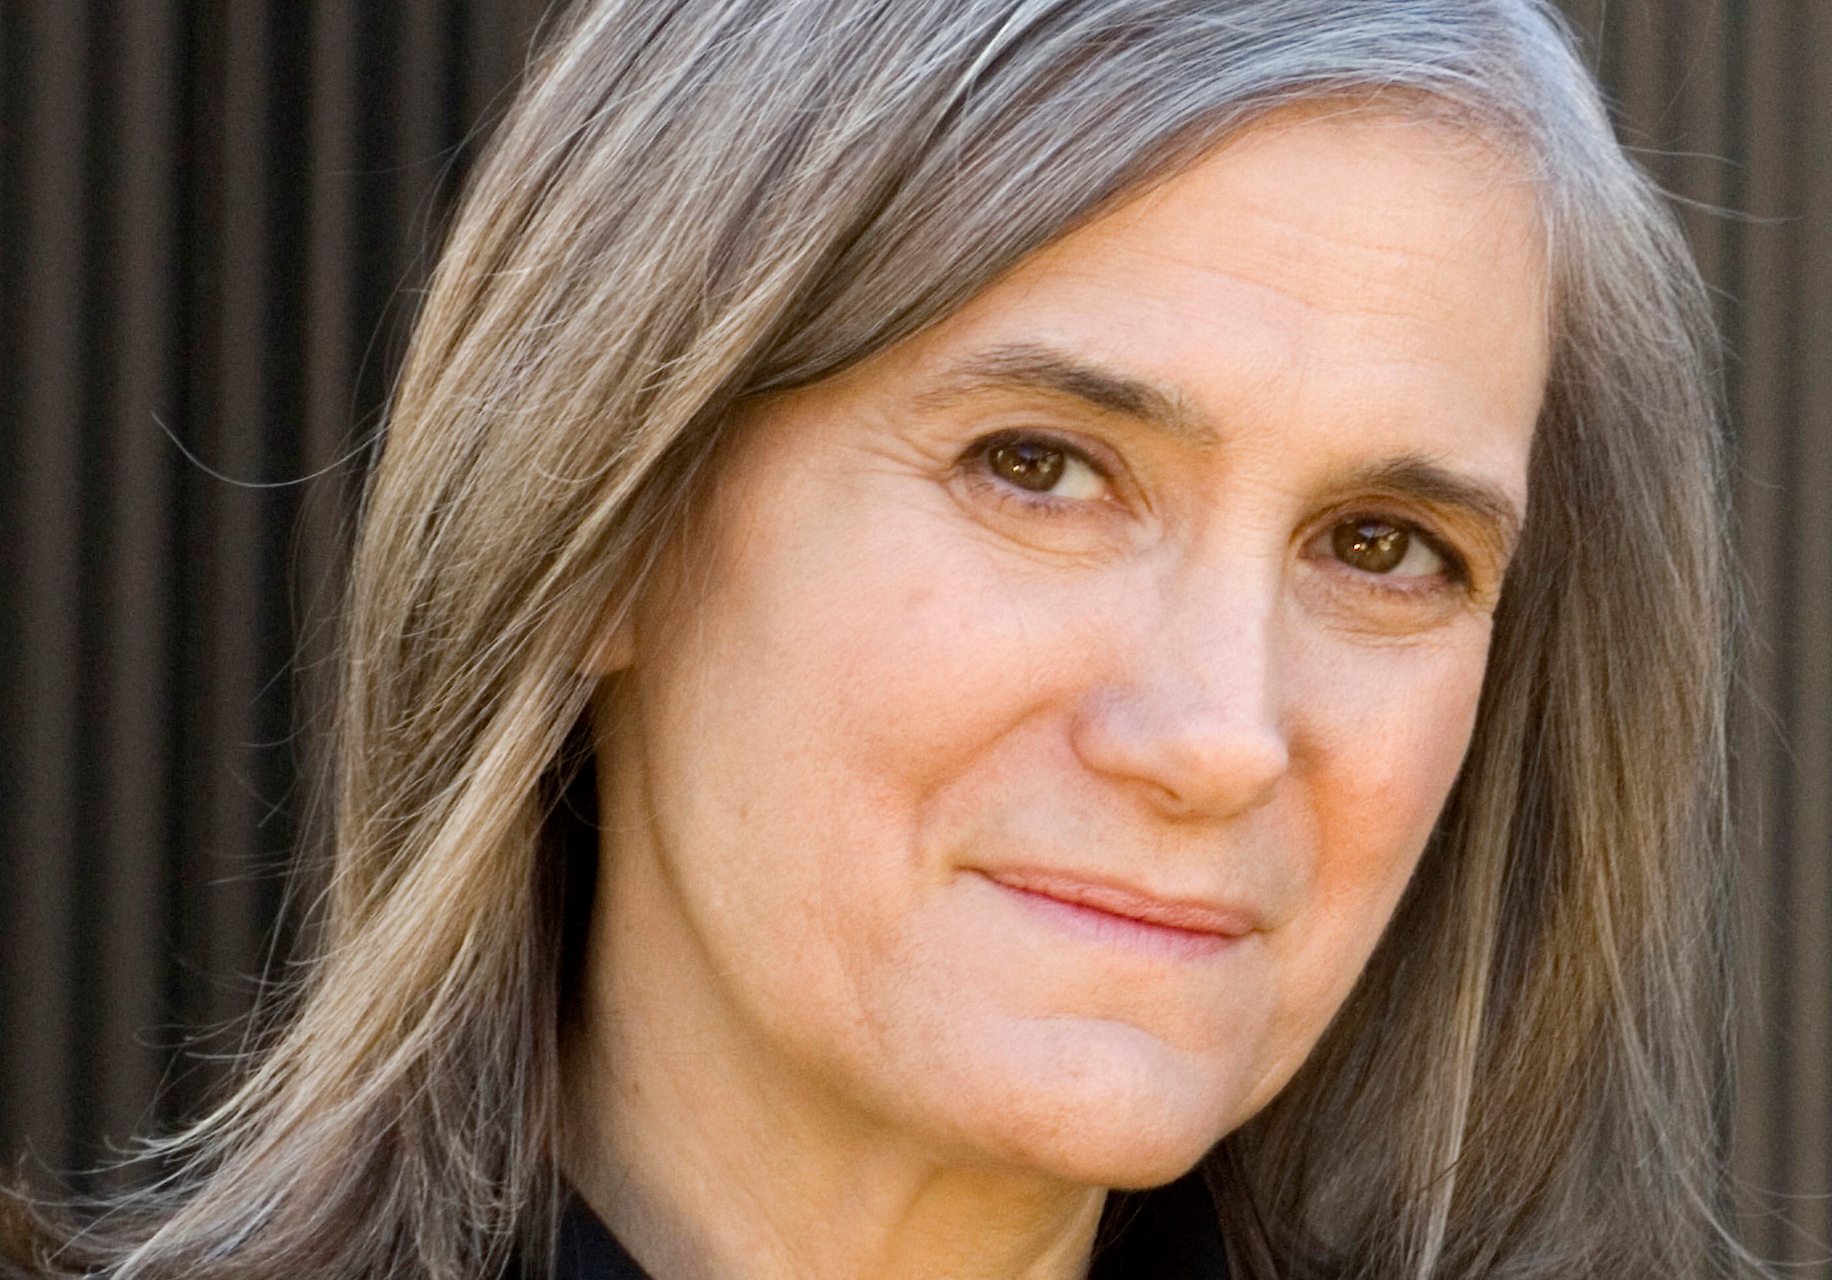 Breaking: ND Prosecutor Seeks “Riot” Charges Against Amy Goodman For Reporting On Pipeline Protest